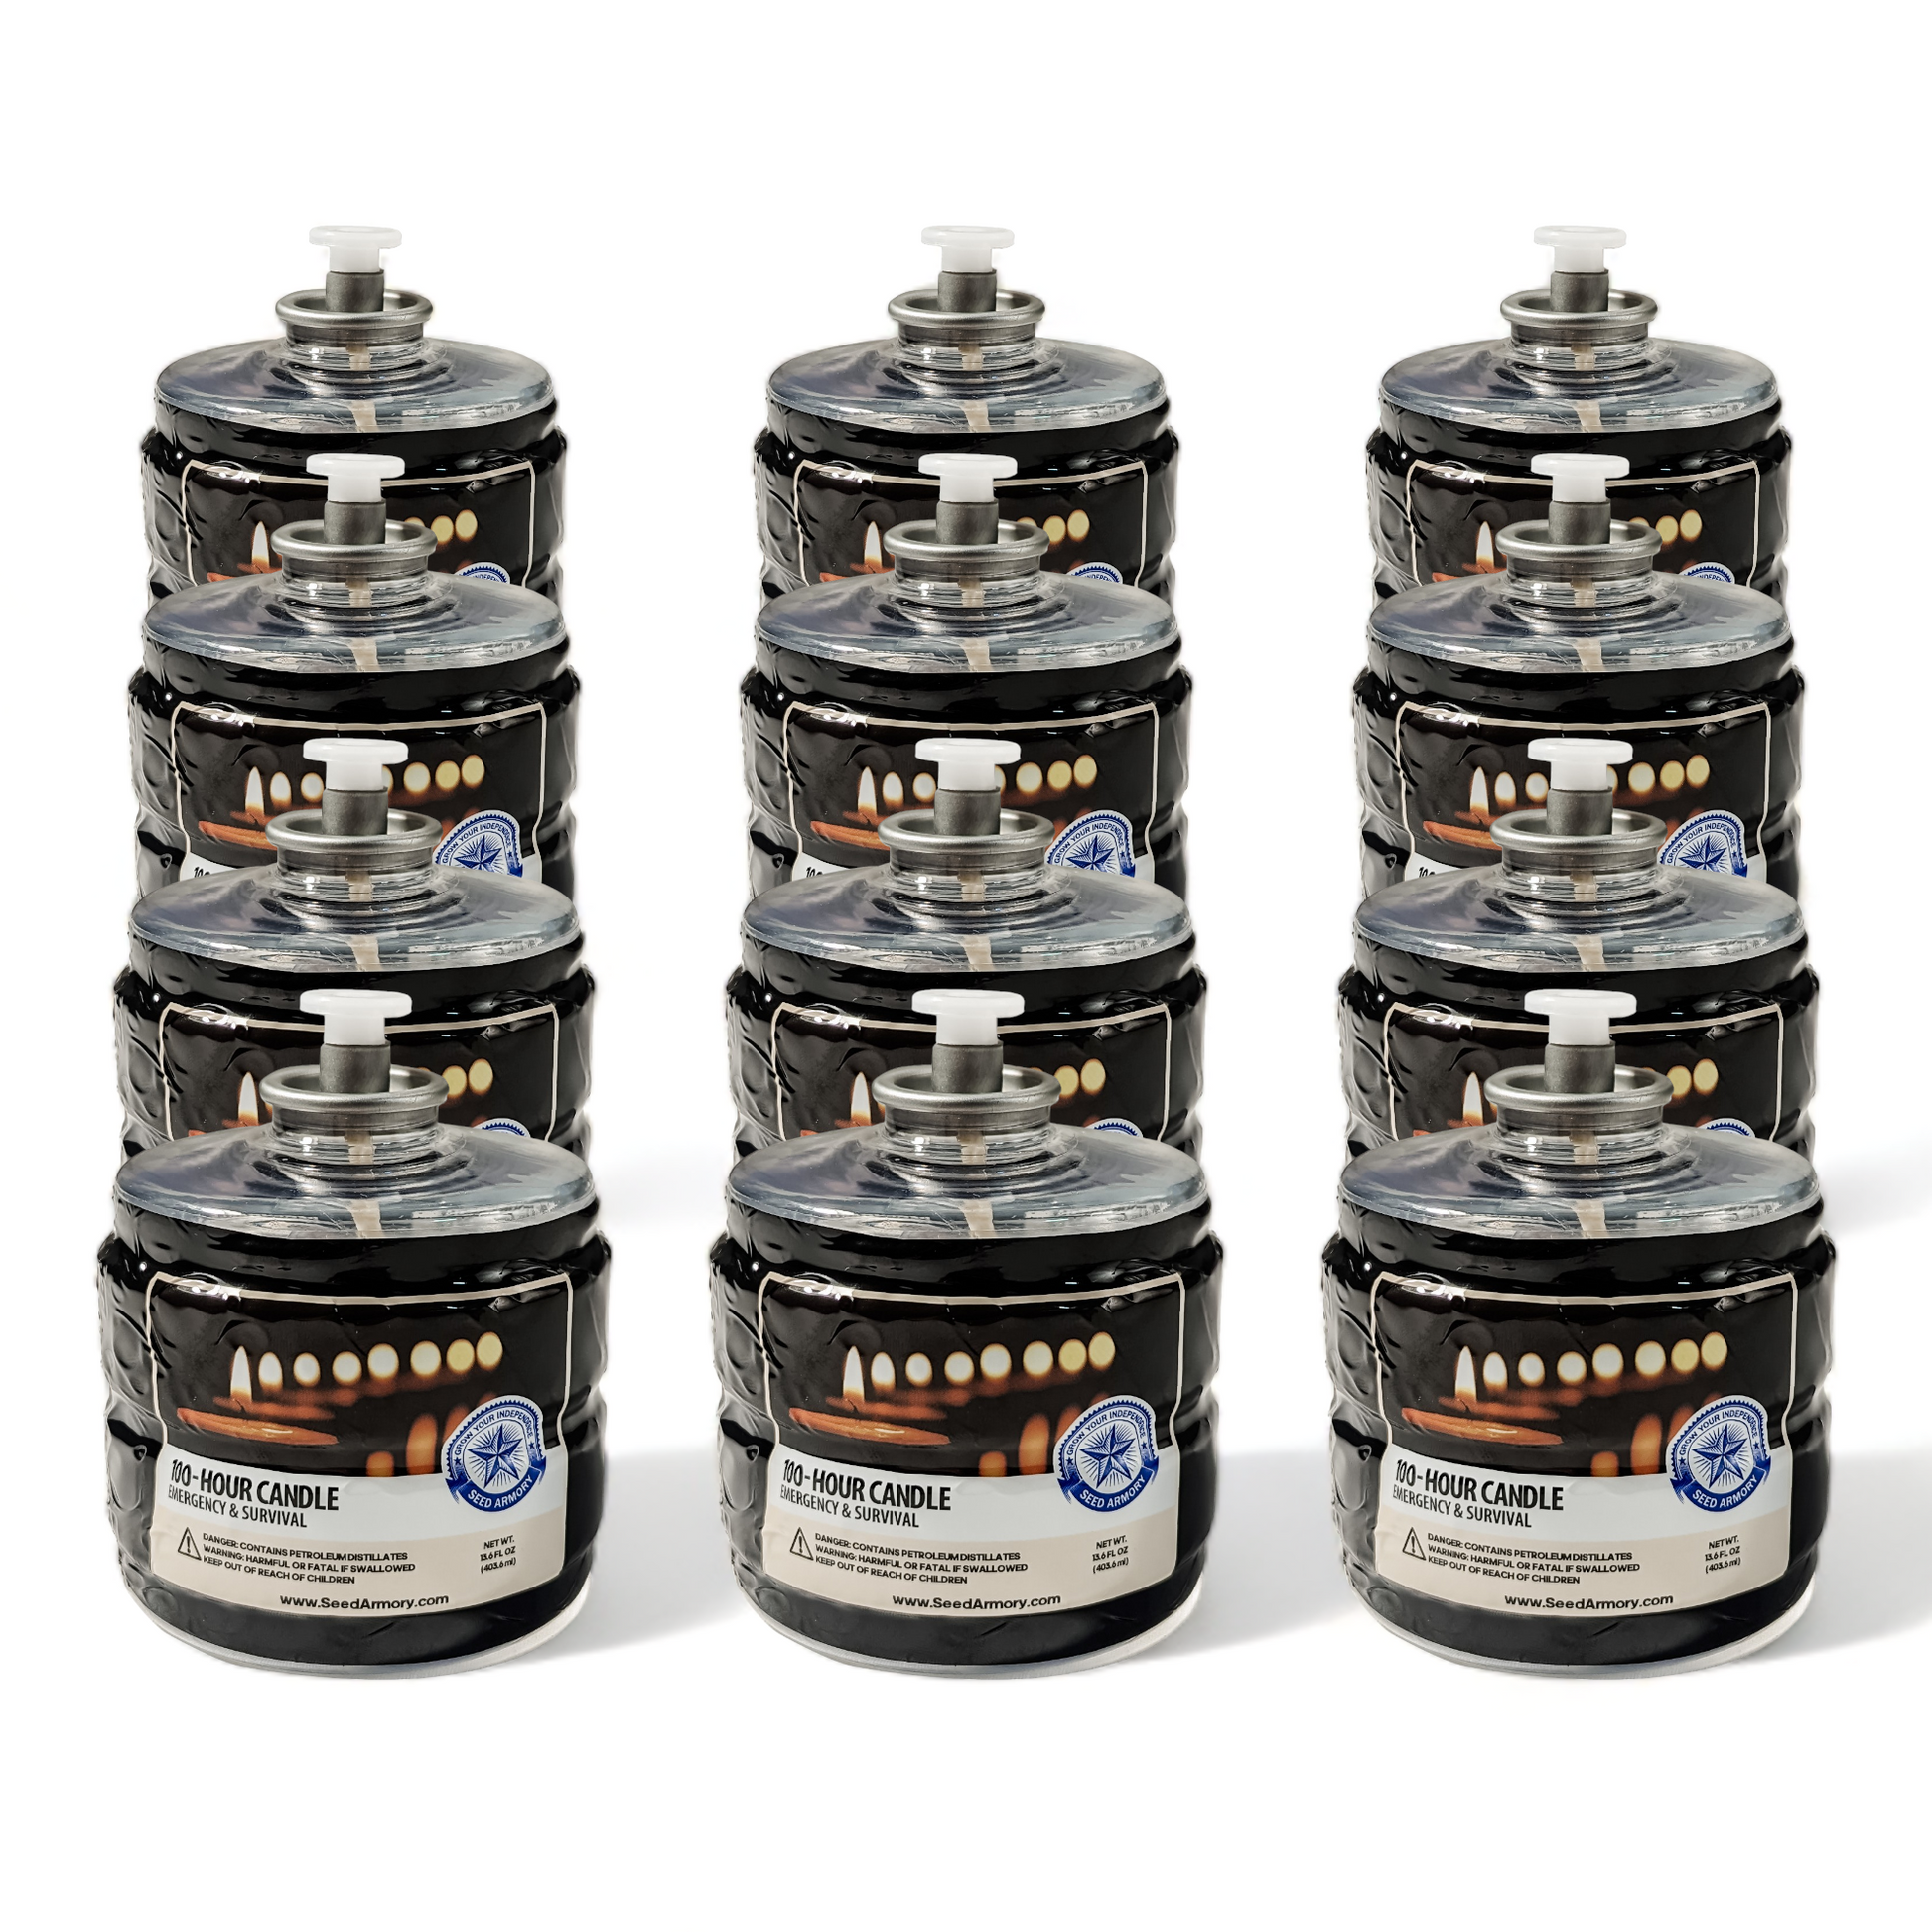 Multipack of smokeless emergency candles with white labels and black lids